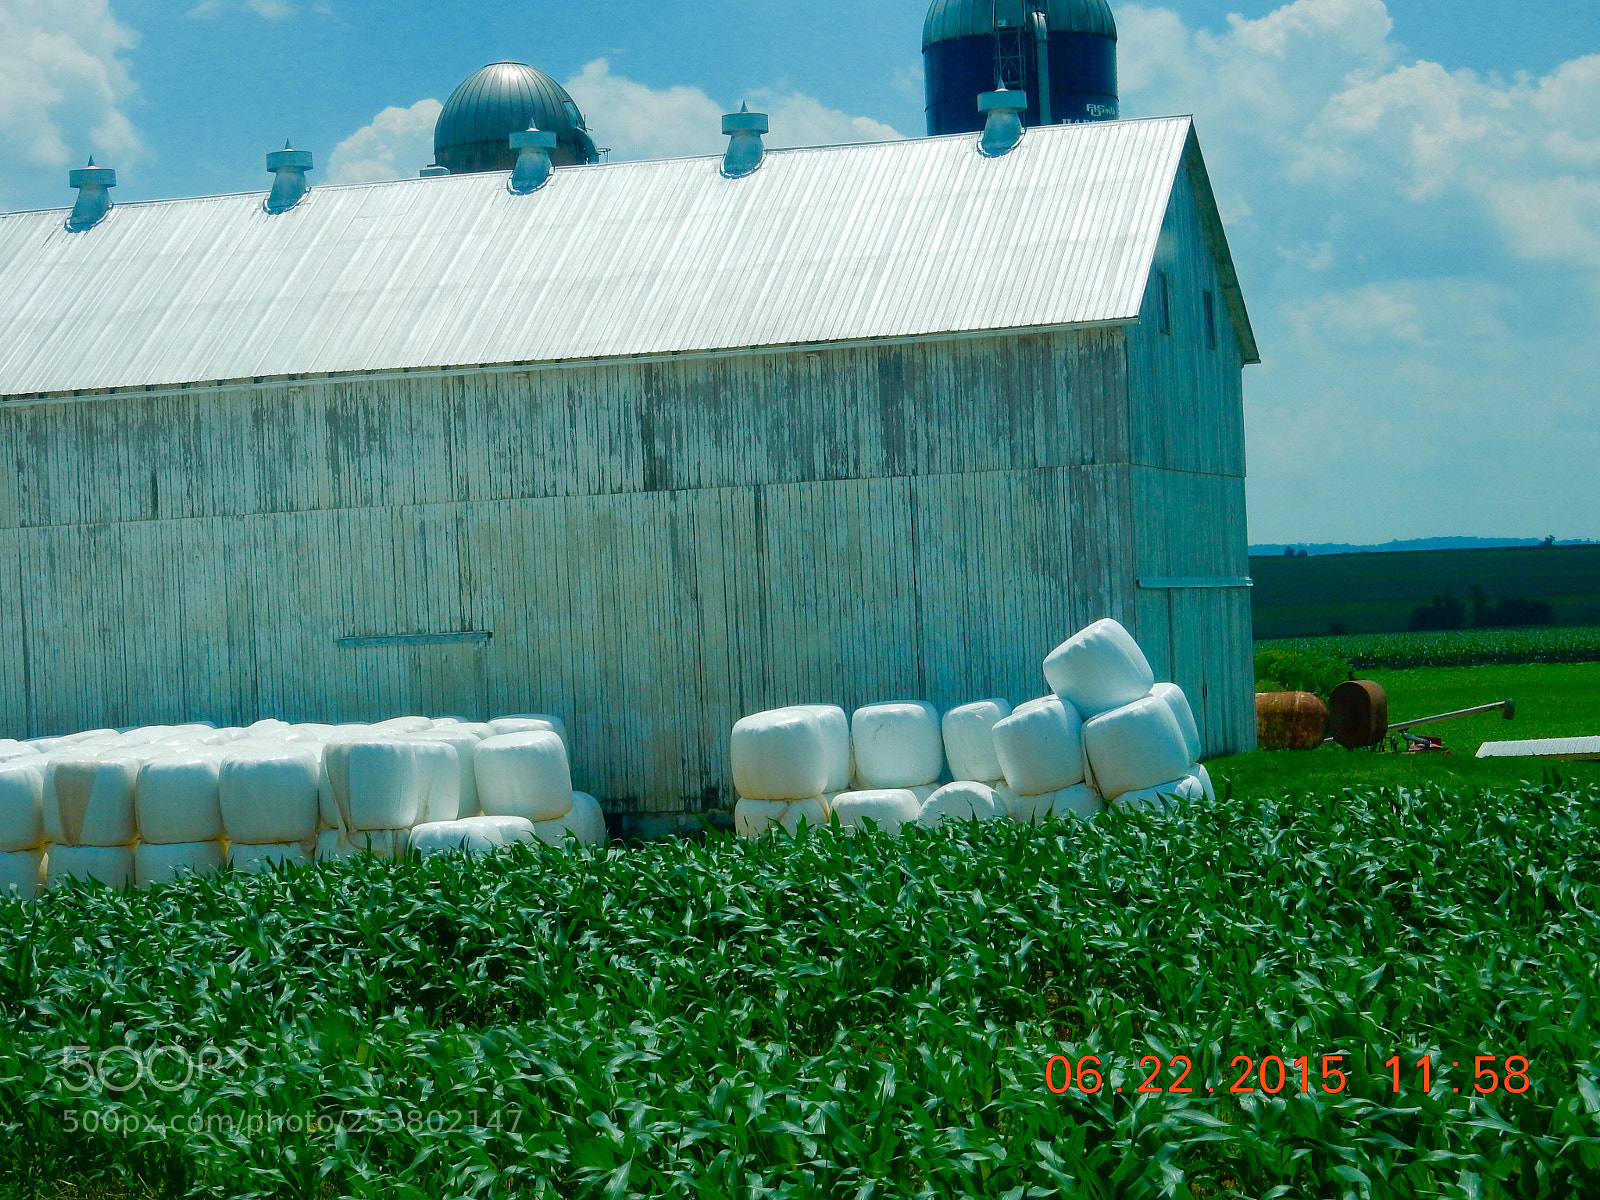 Nikon Coolpix S9900 sample photo. Hay bales wrapped...looking like photography